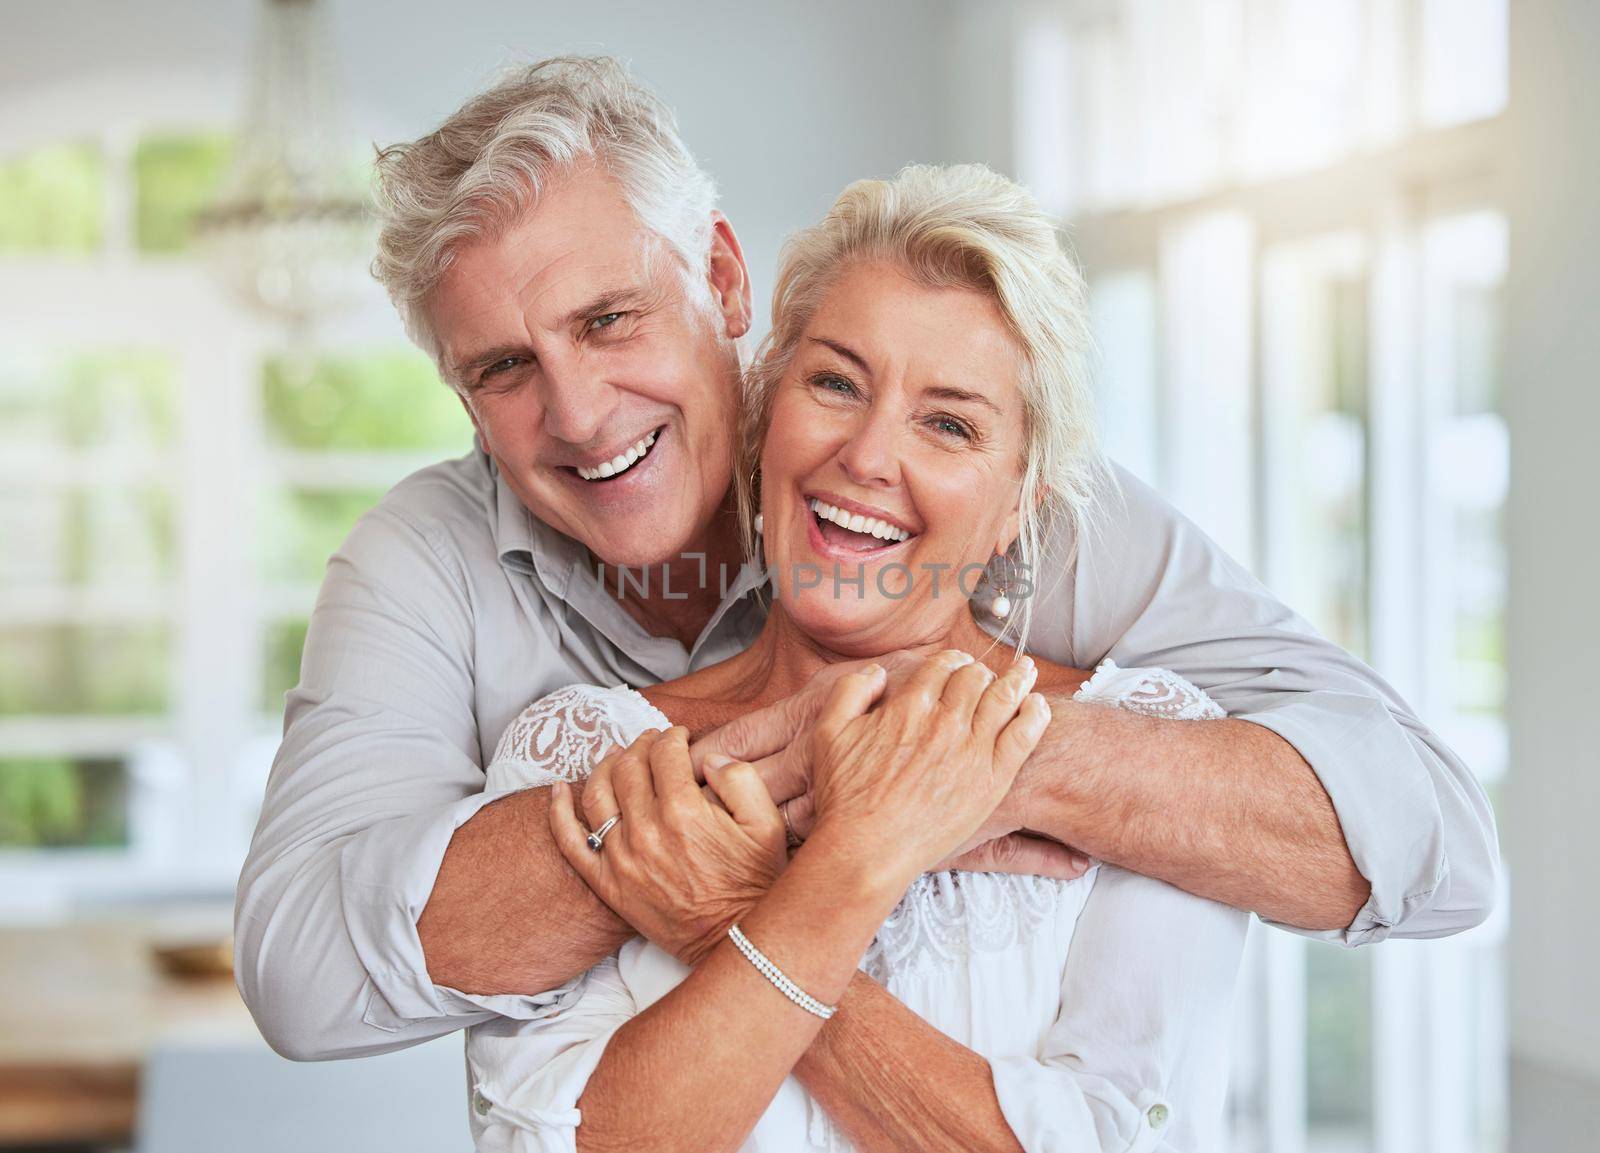 Love, couple and retirement with a senior man and woman looking happy and hugging in their home together. Smile, romance and relationship with an elderly male and female pensioner in a house.